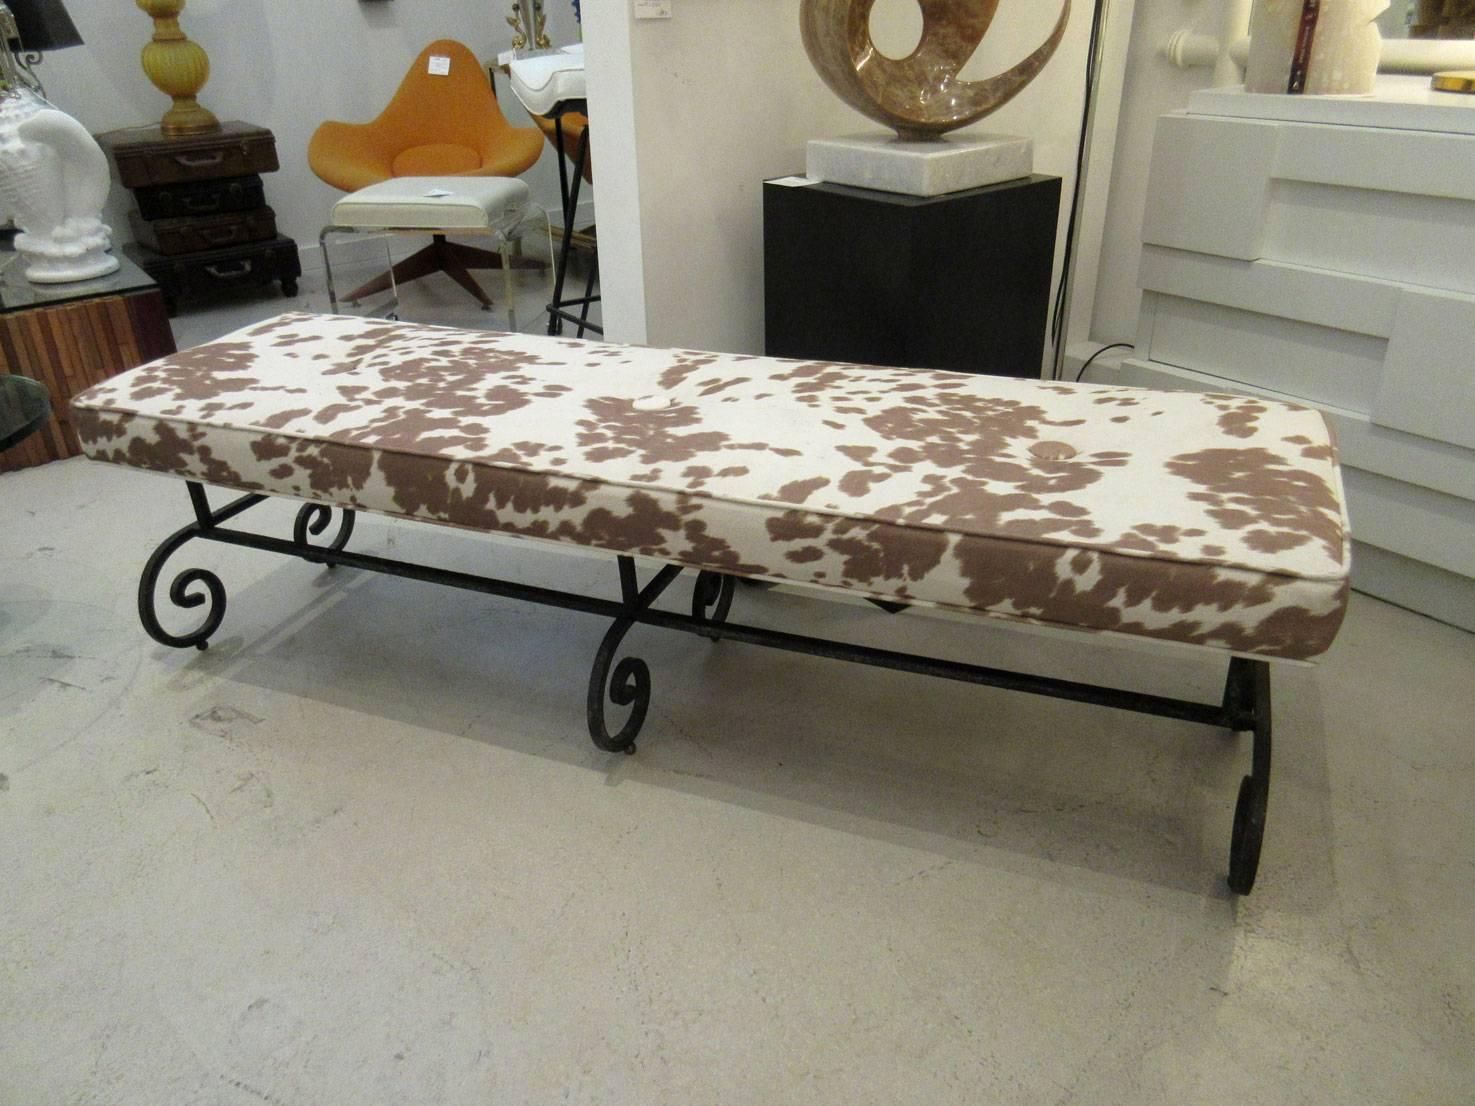 Black long wrought iron bench that rests on six small brass ball feet. Upholstered in faux cowhide.